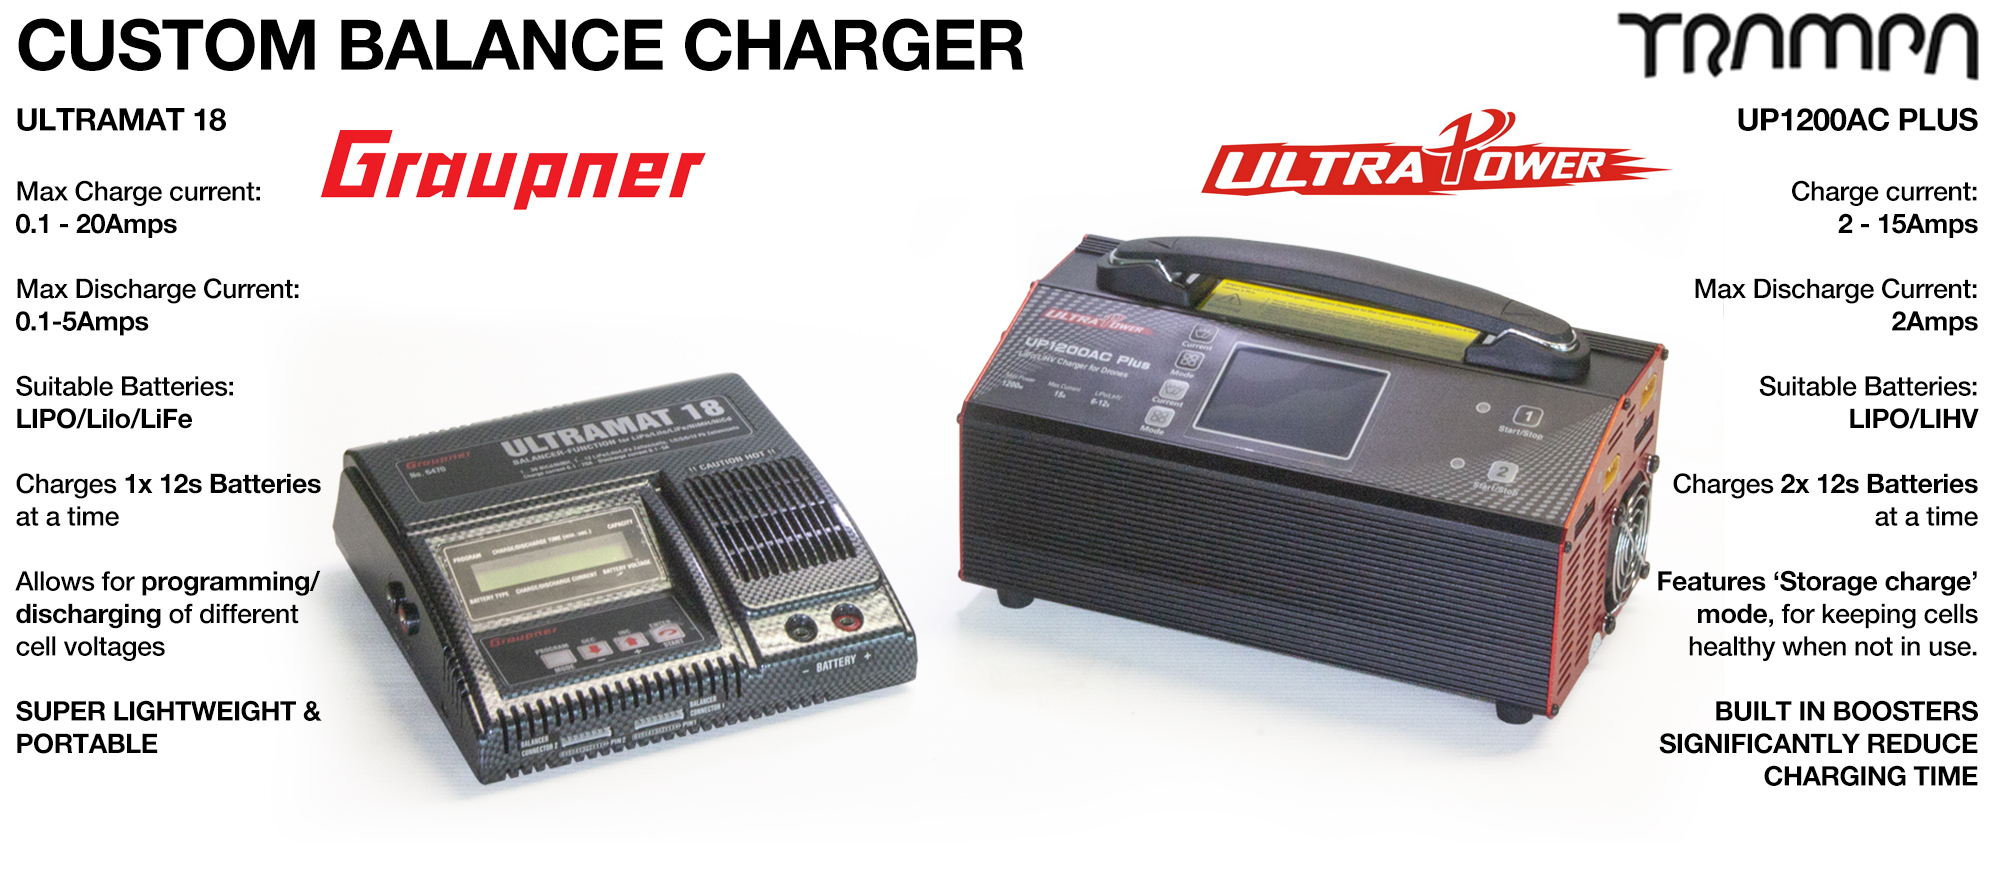 Custom Charger Graupner Ultramat 18 or ULTRAPOWER UP1200AC - Small & Portable or Super quick Charging!